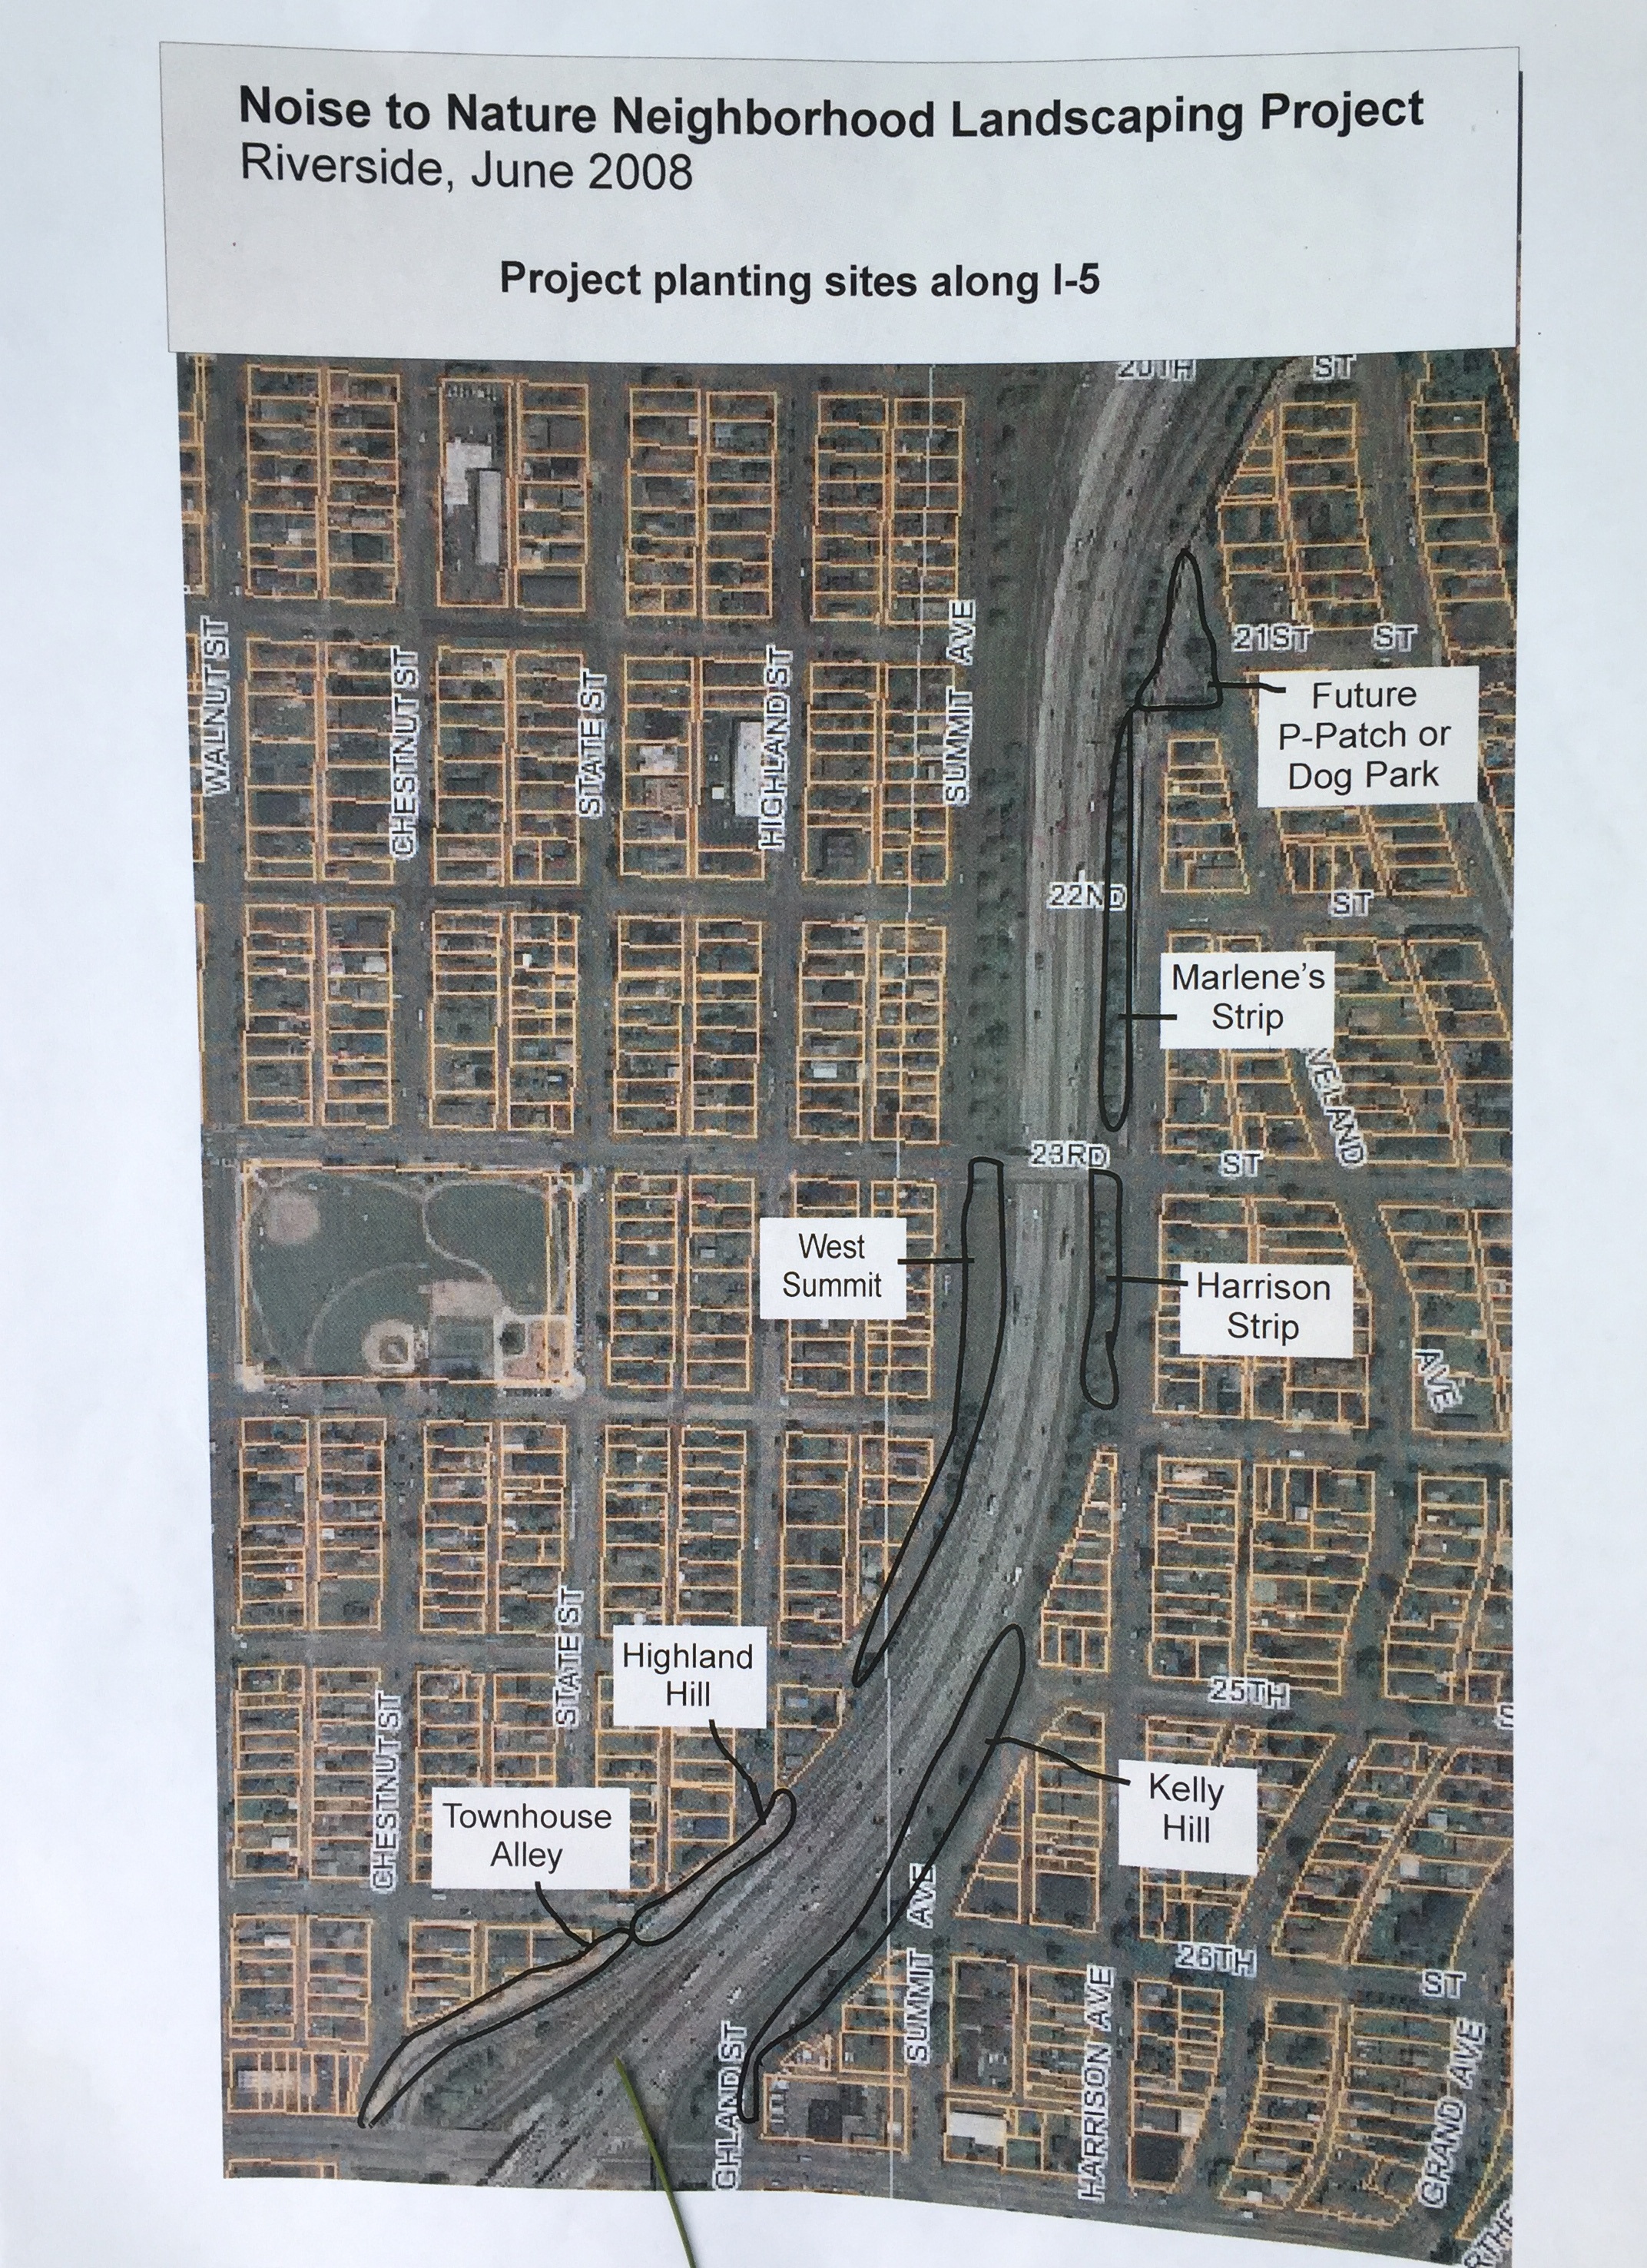 Plan of Site to be Planted along I-5.